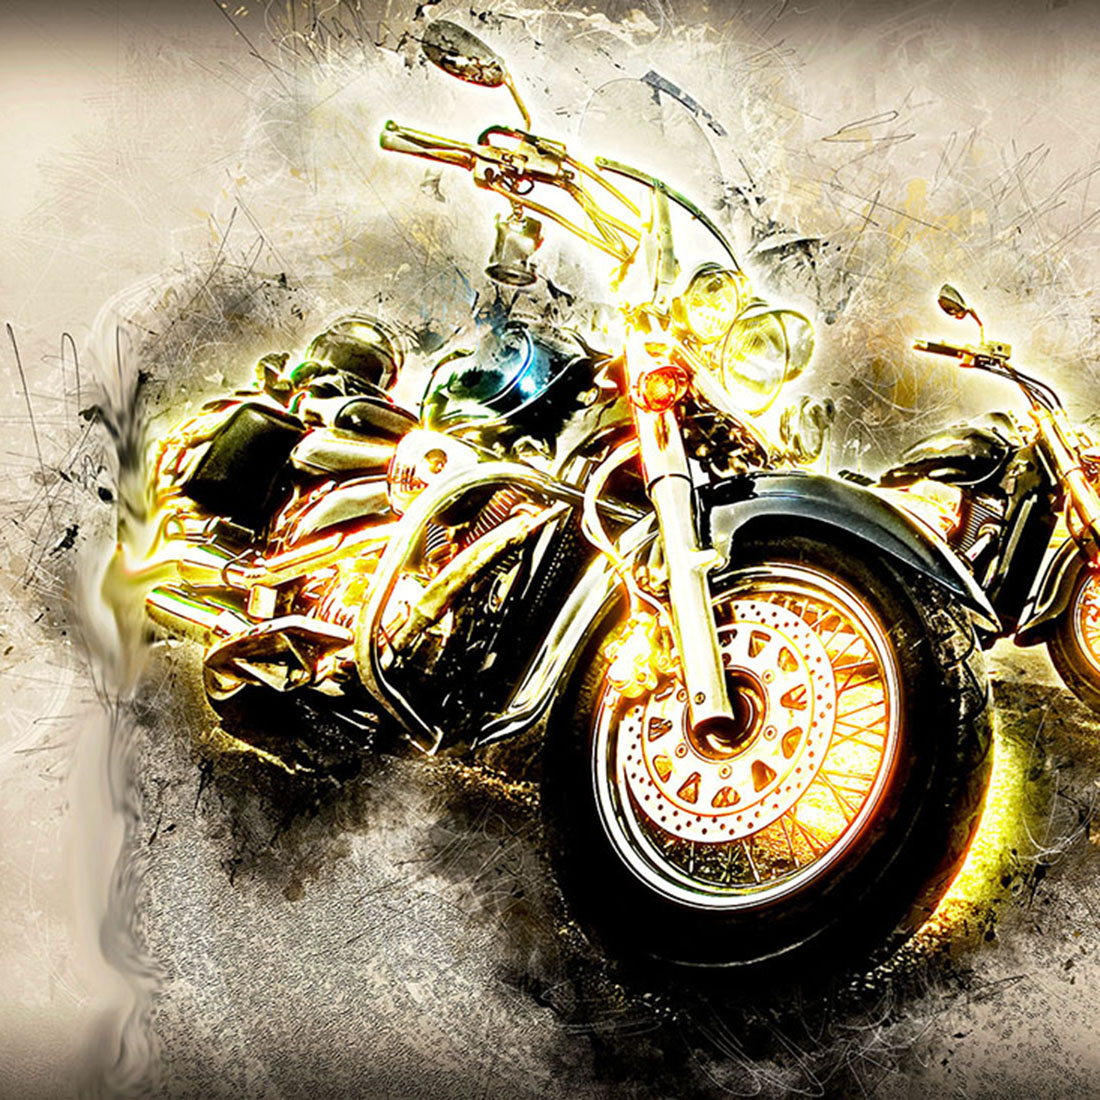 Motorcycles HQ Illustrations with Grunge Style cover image.